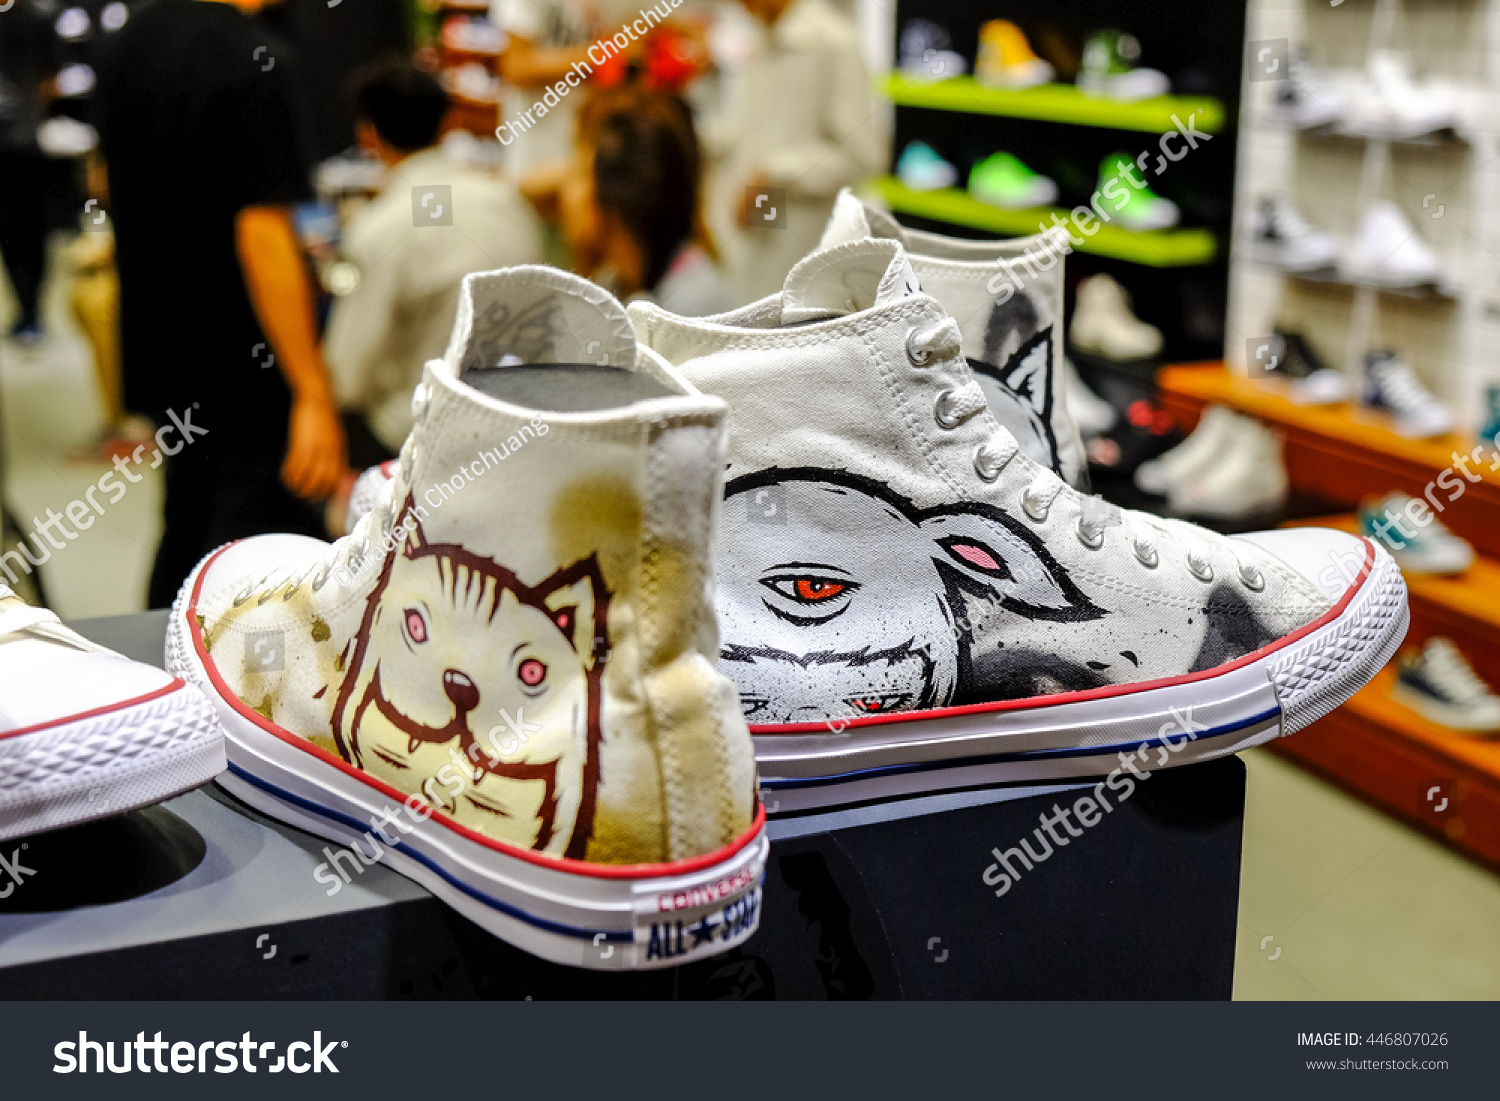 converse limited edition thailand